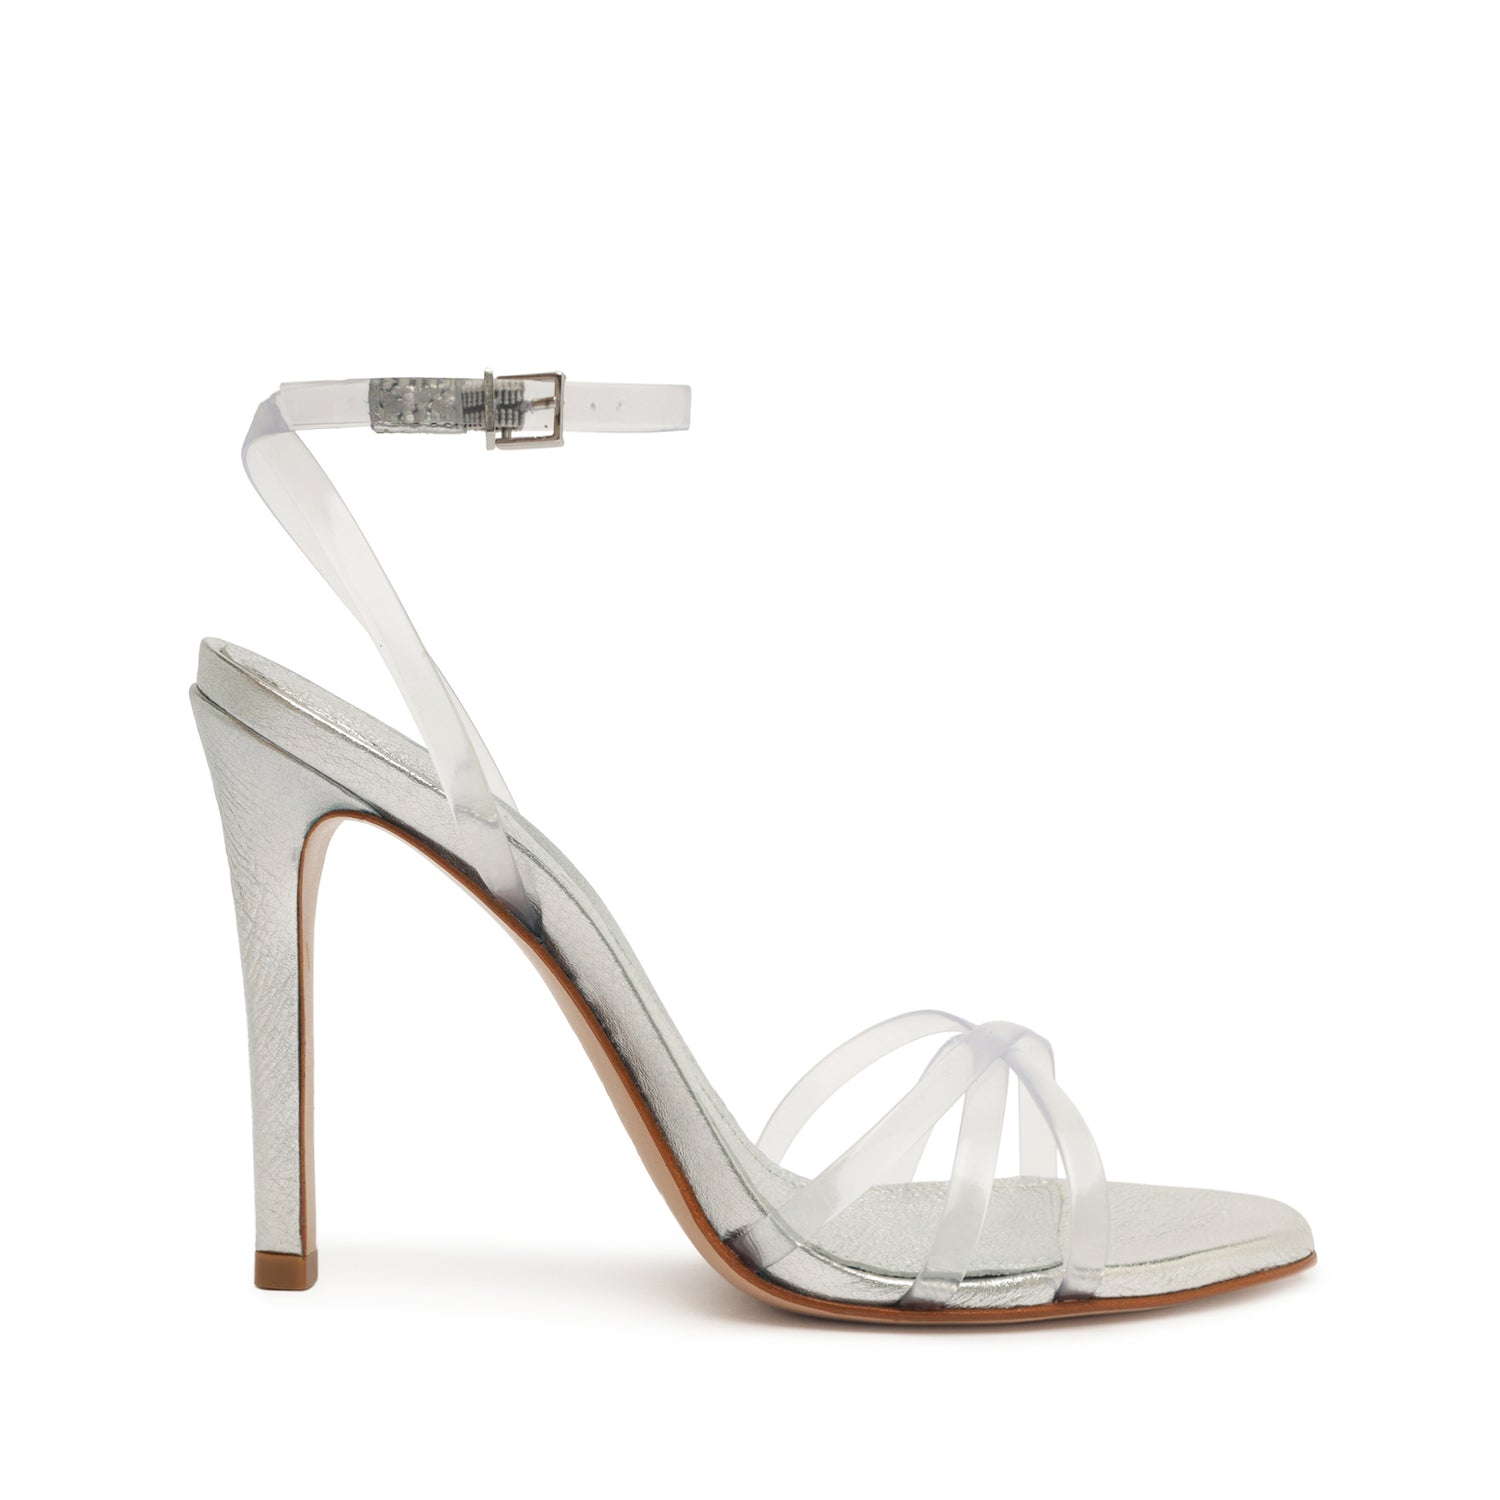 Amelia Leather Sandal Sandals High Summer 23 5 Silver Leather - Schutz Shoes